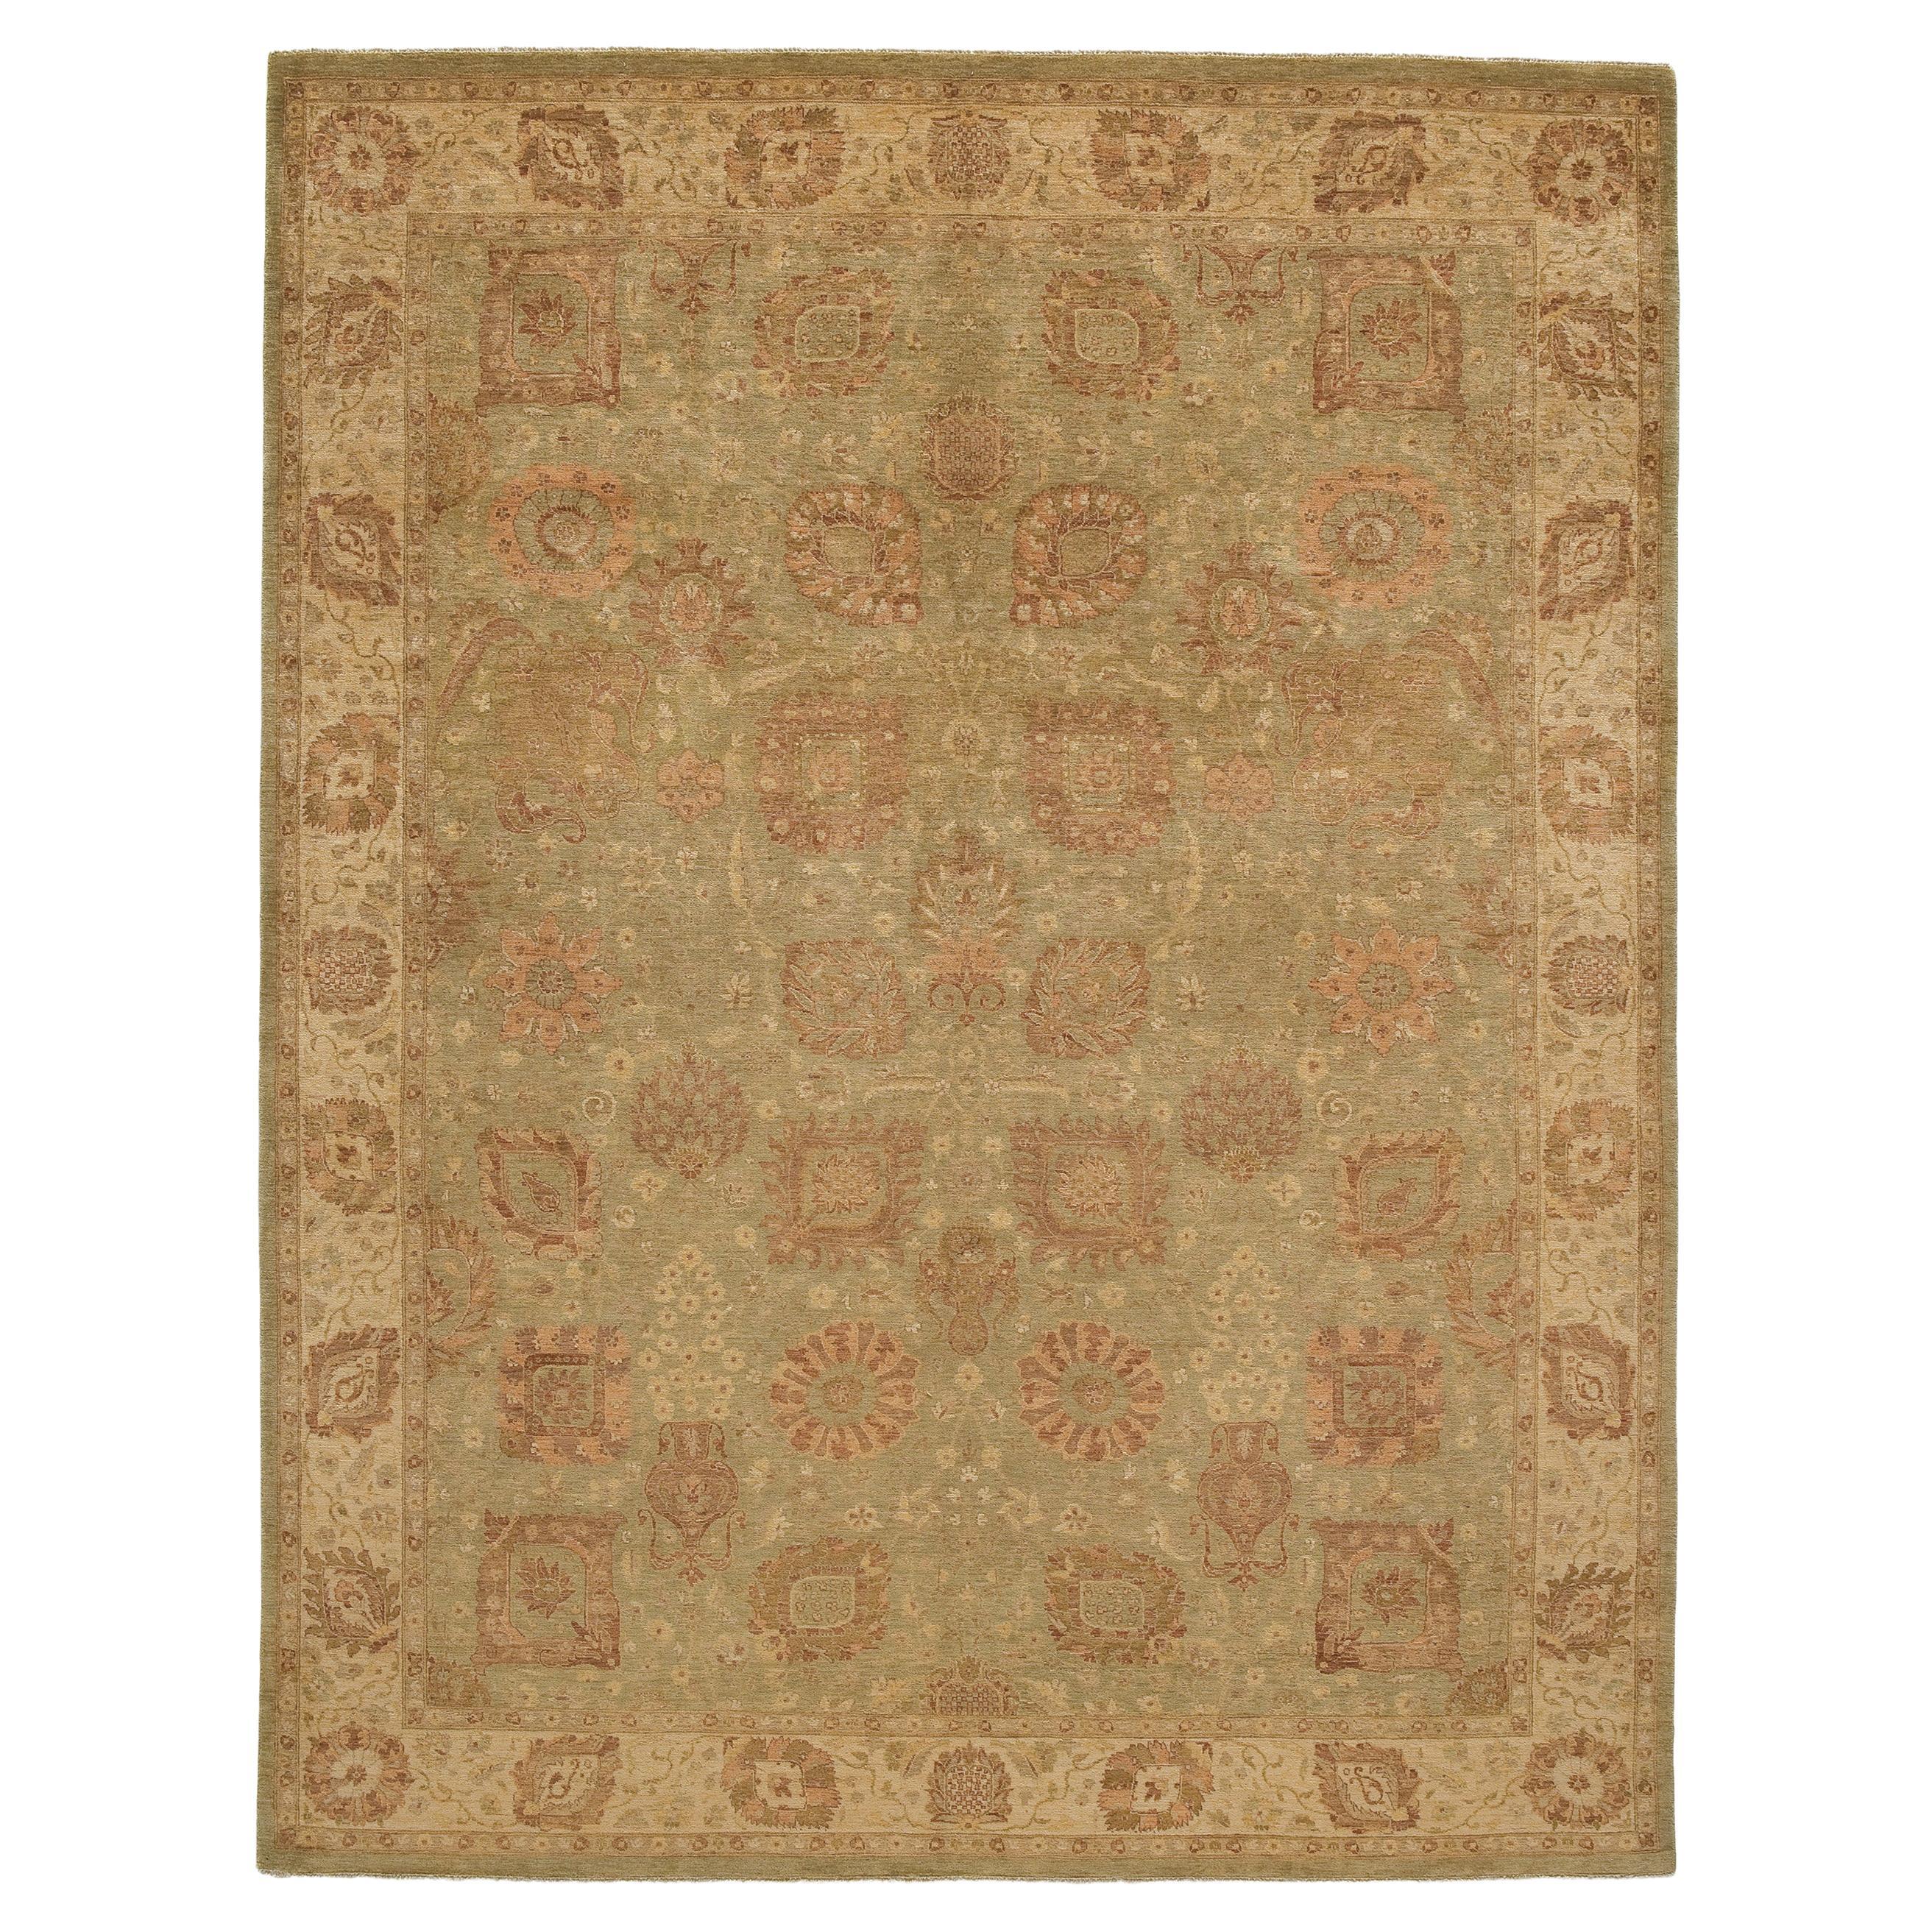 Luxury Traditional Hand-Knotted Vase Pistachio and Ivory 10x14 Rug